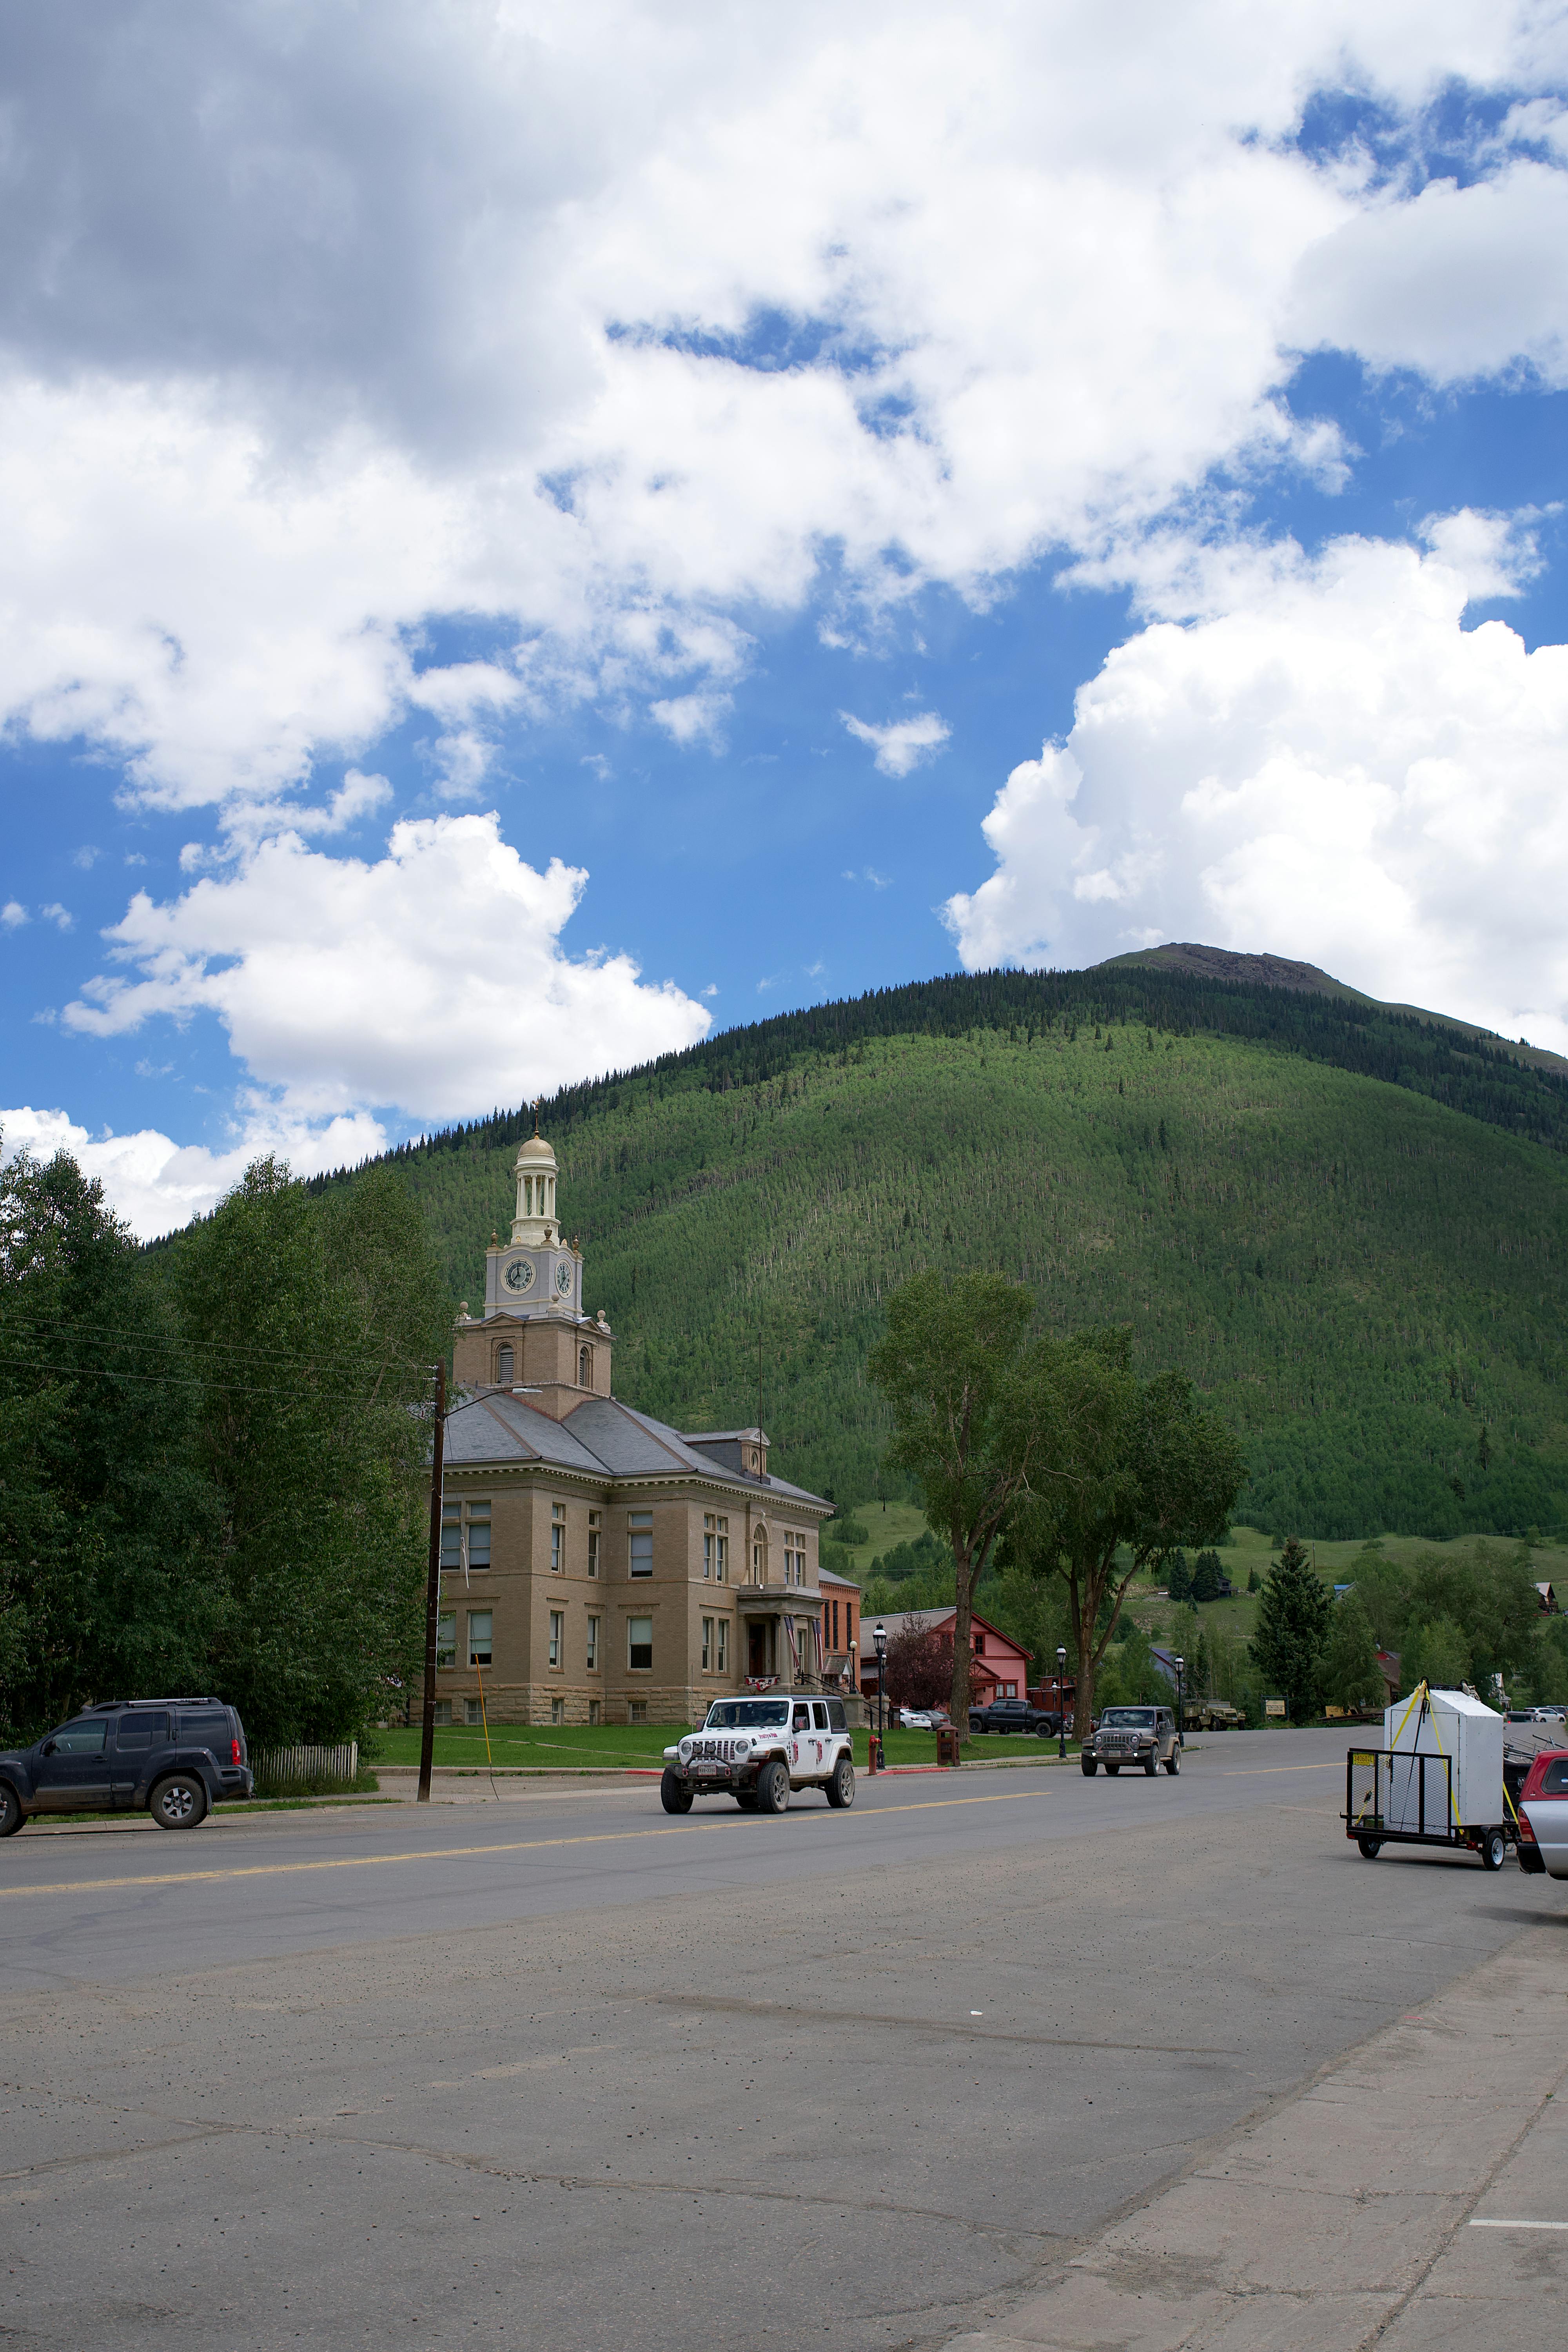 traffic on the street in front of the san juan county courthouse in silverton